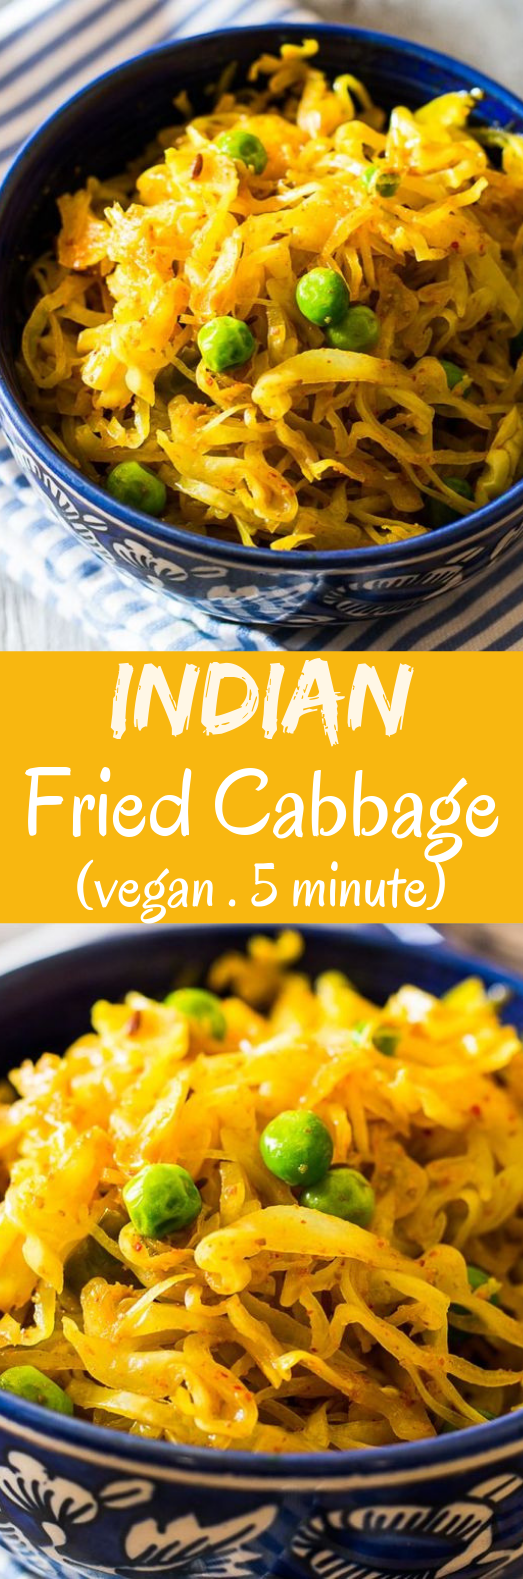 Indian Fried Cabbage #vegetarian #recipes